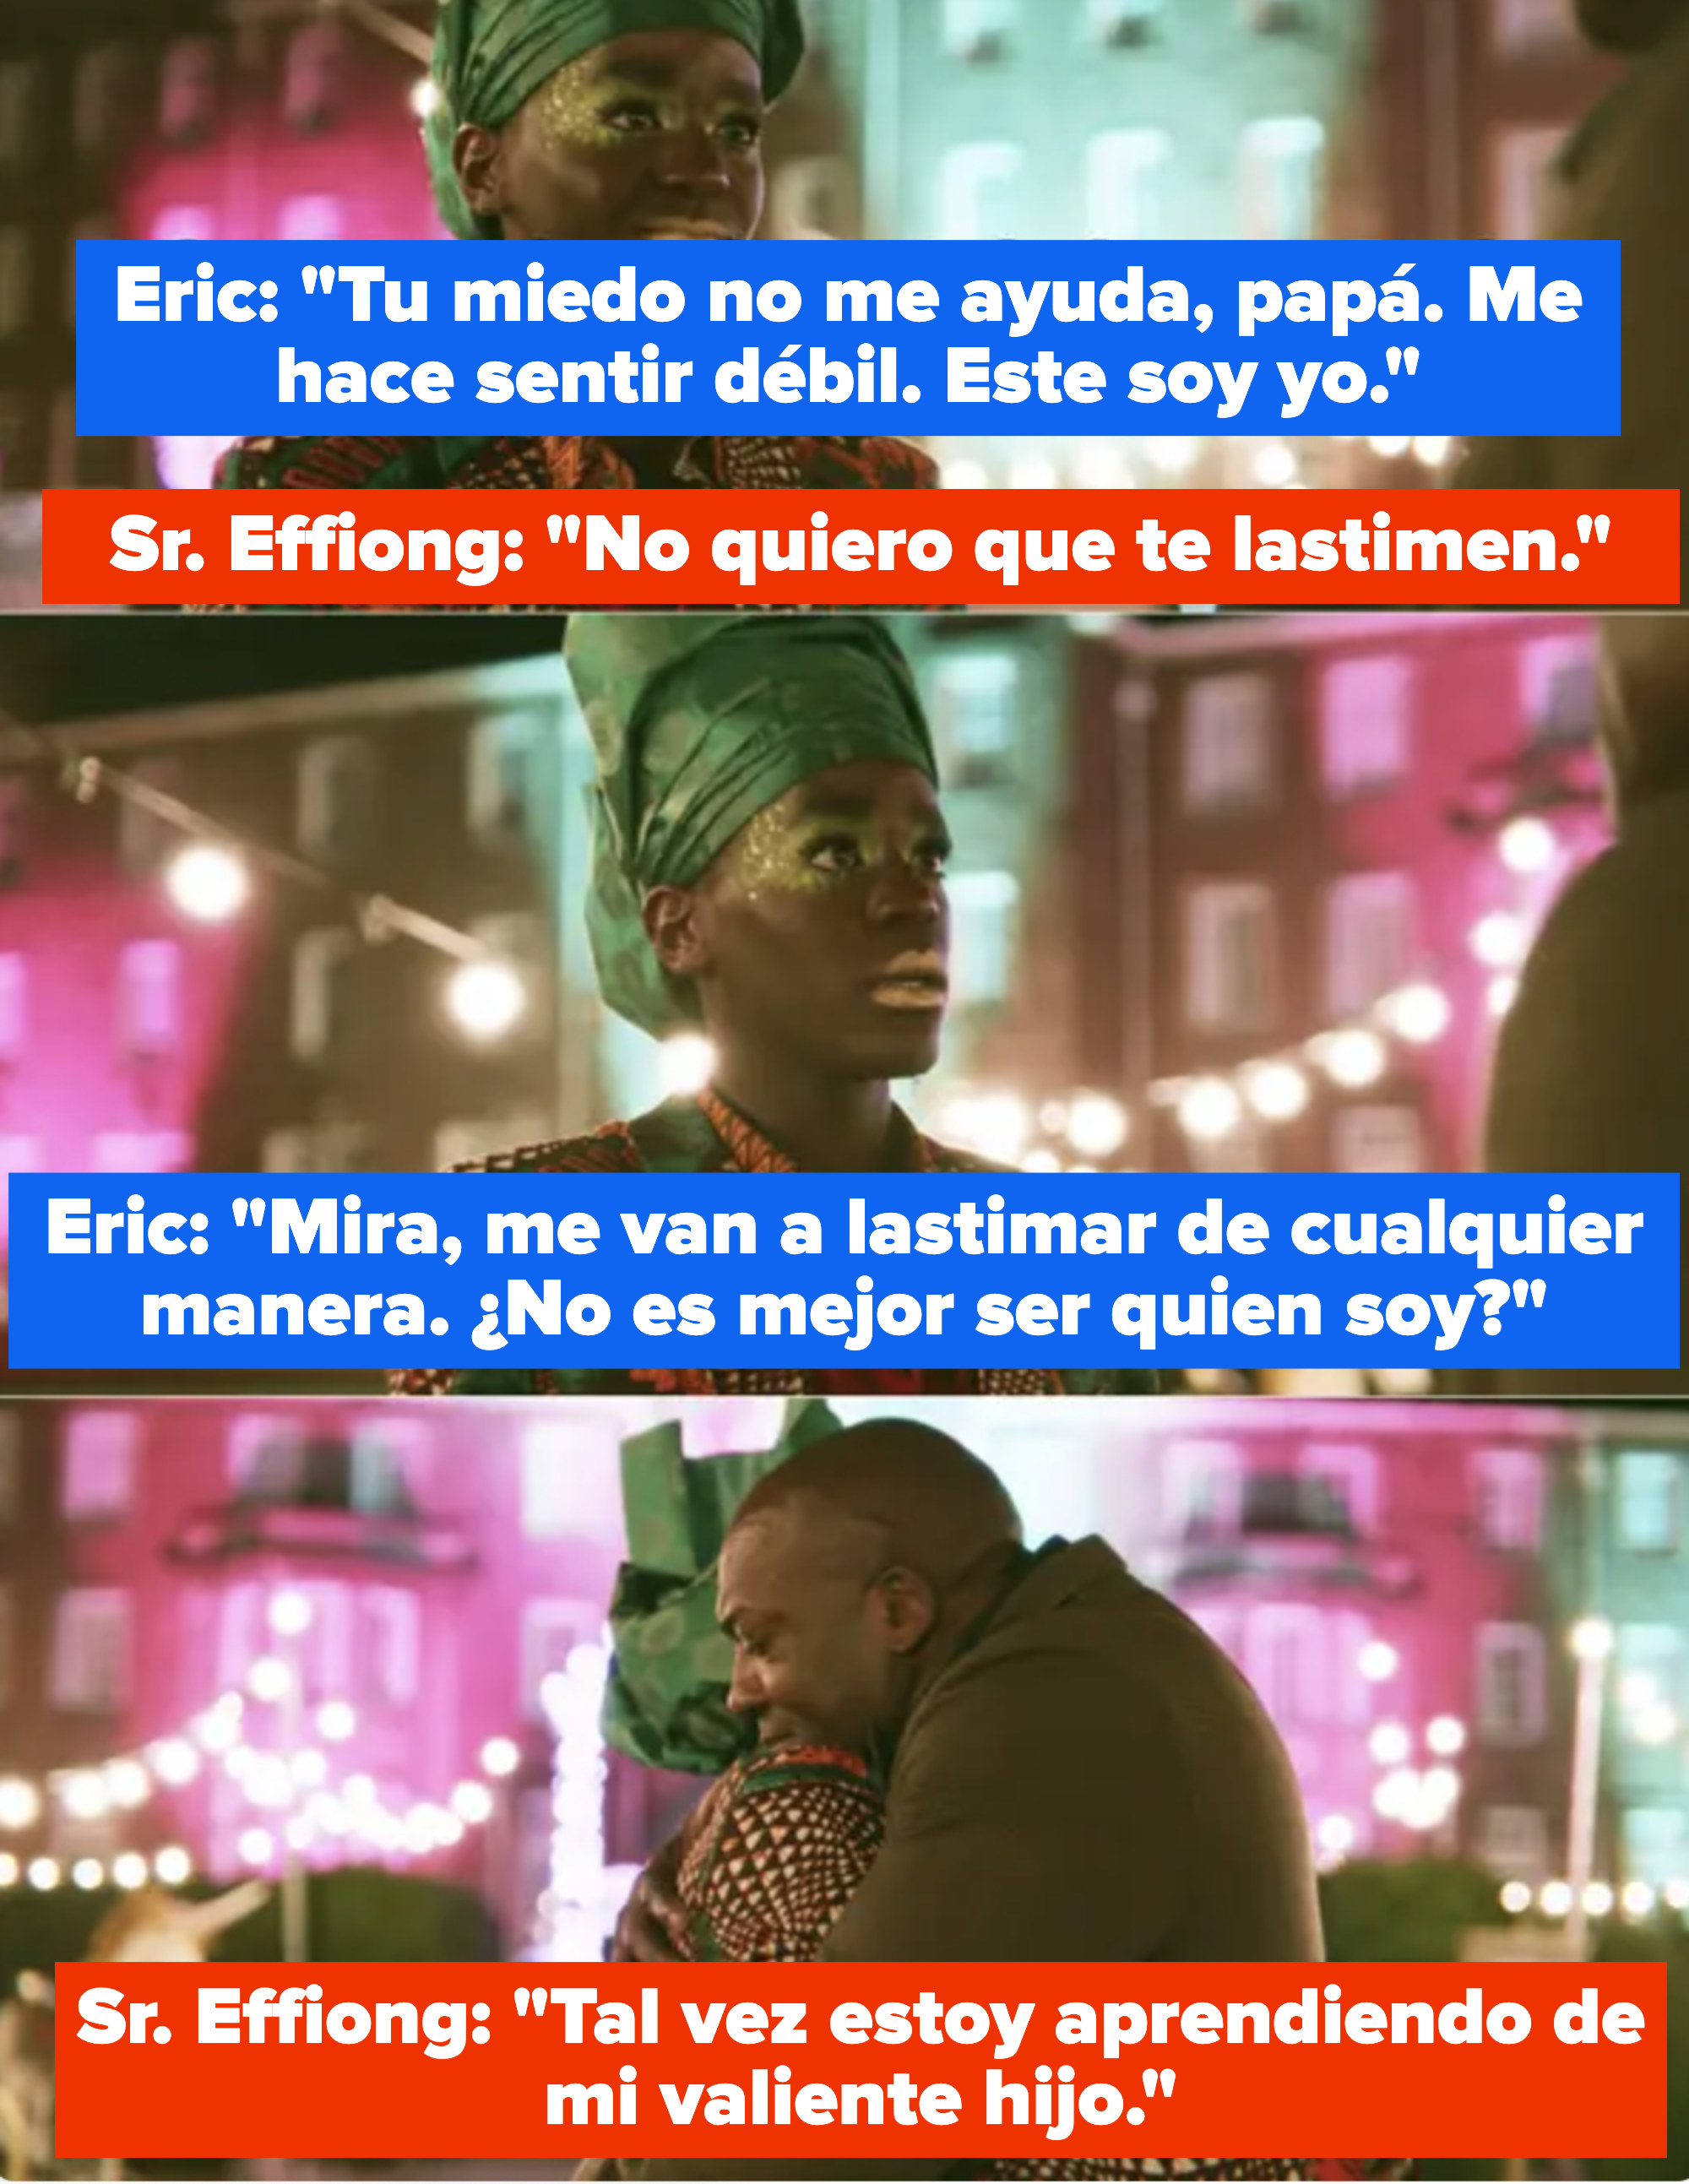 Eric tells his dad he&#x27;ll be hurt either way so it&#x27;s better to be who he is, his dad hugs him and says he&#x27;s learning from &quot;his brave son&quot;